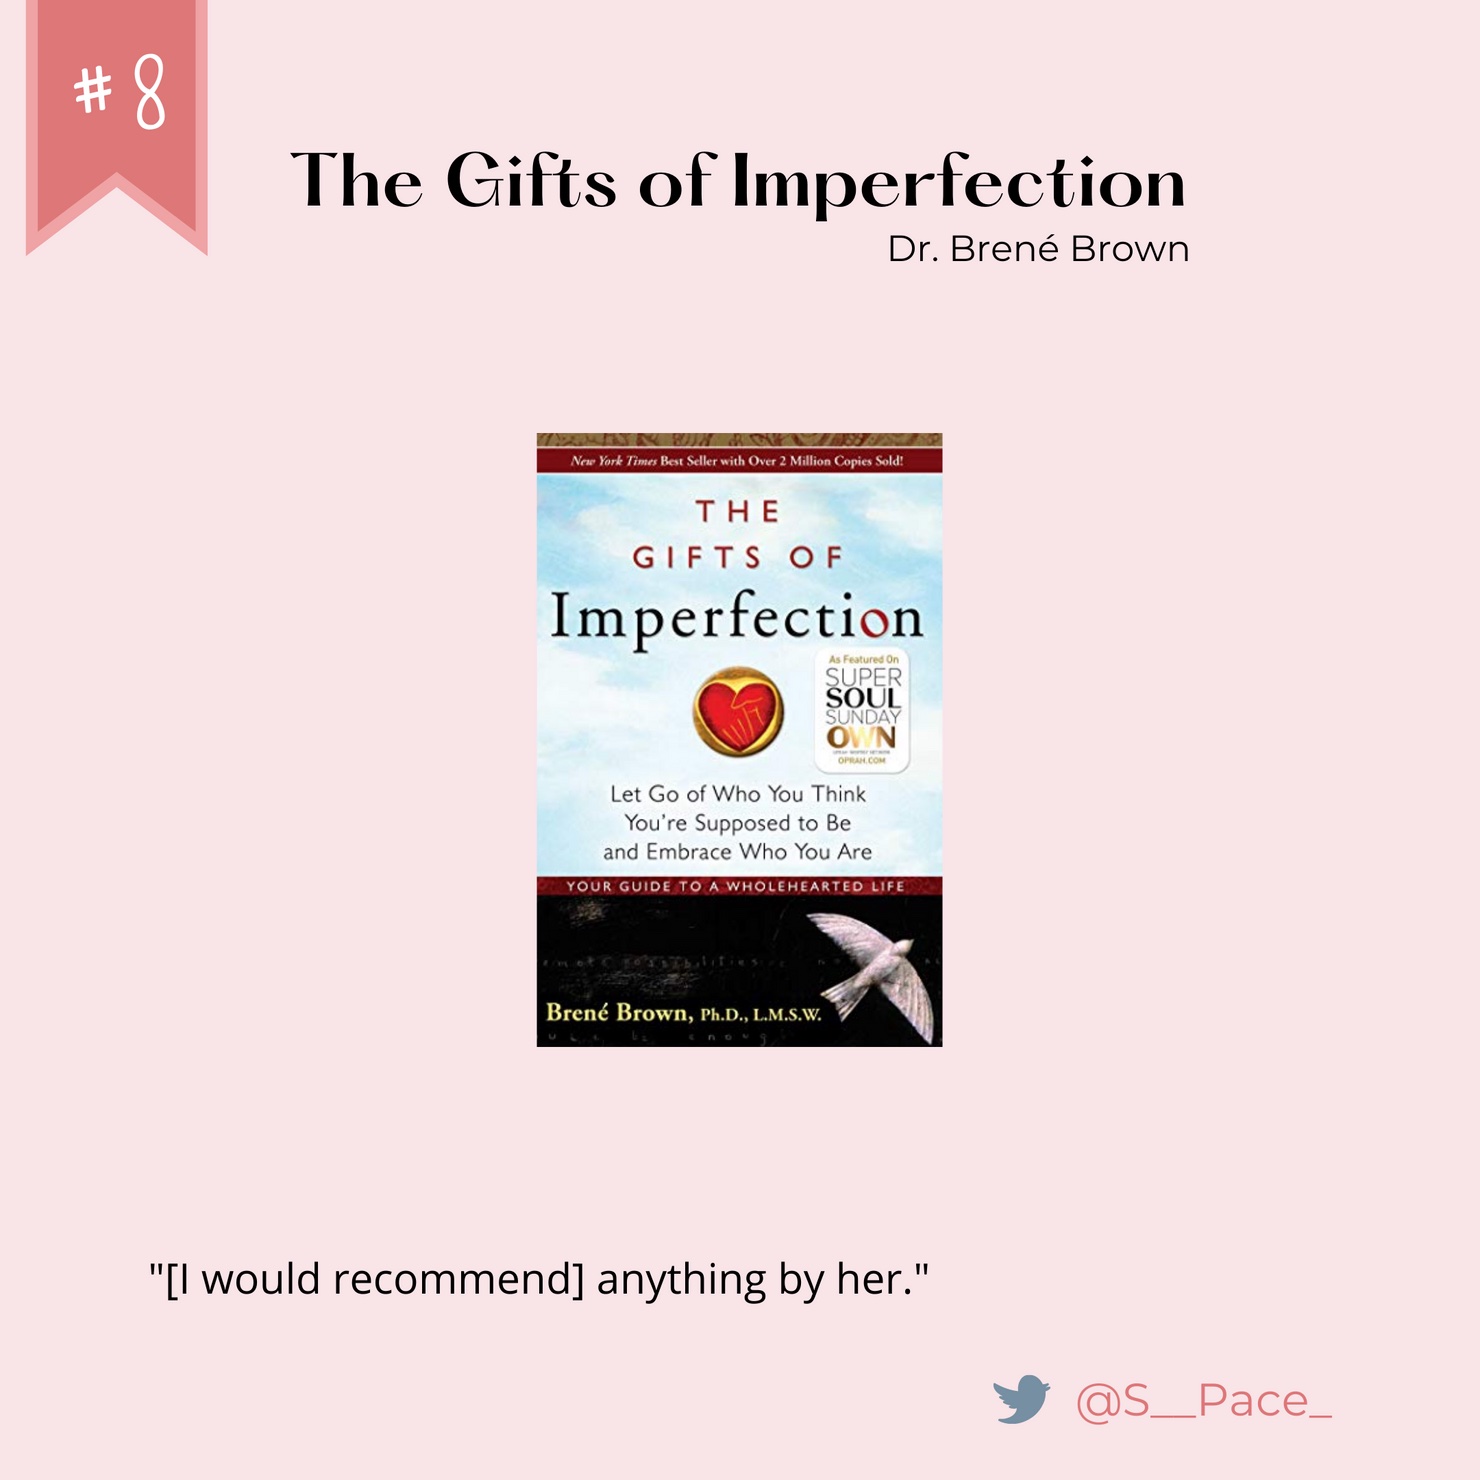 Number 8: The Gifts of Imperfection. Written by Dr. Brene Brown. Quote from @s_pace_ on twitter: "I would recommend anything by her."Number 8: The Gifts of Imperfection. Written by Dr. Brene Brown. Quote from @s_pace_ on twitter: "I would recommend anything by her."